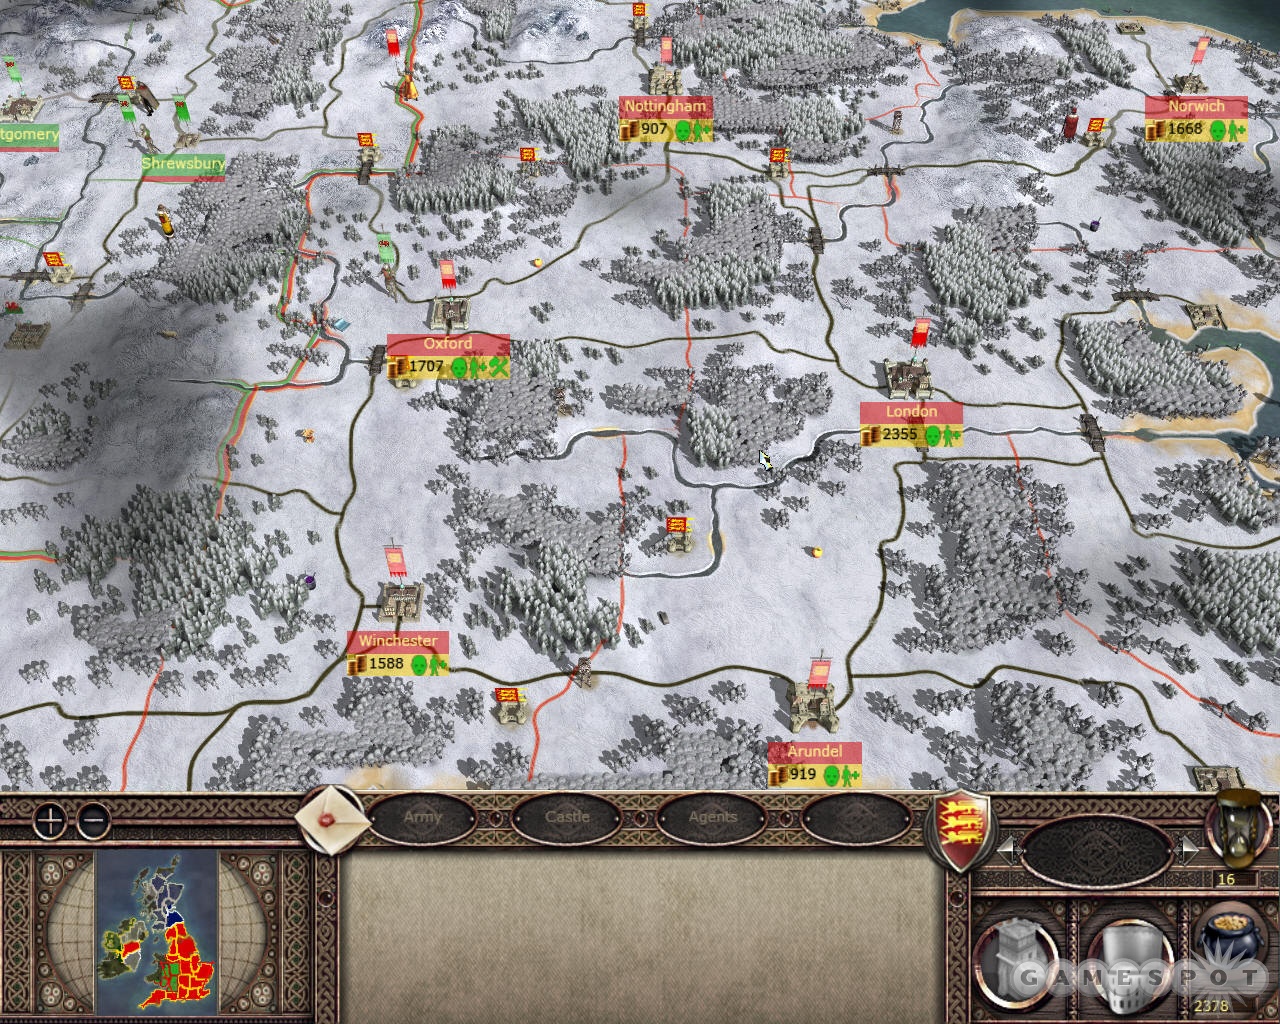 Kingdoms is a great value if you're a Total War fan who can't get enough.